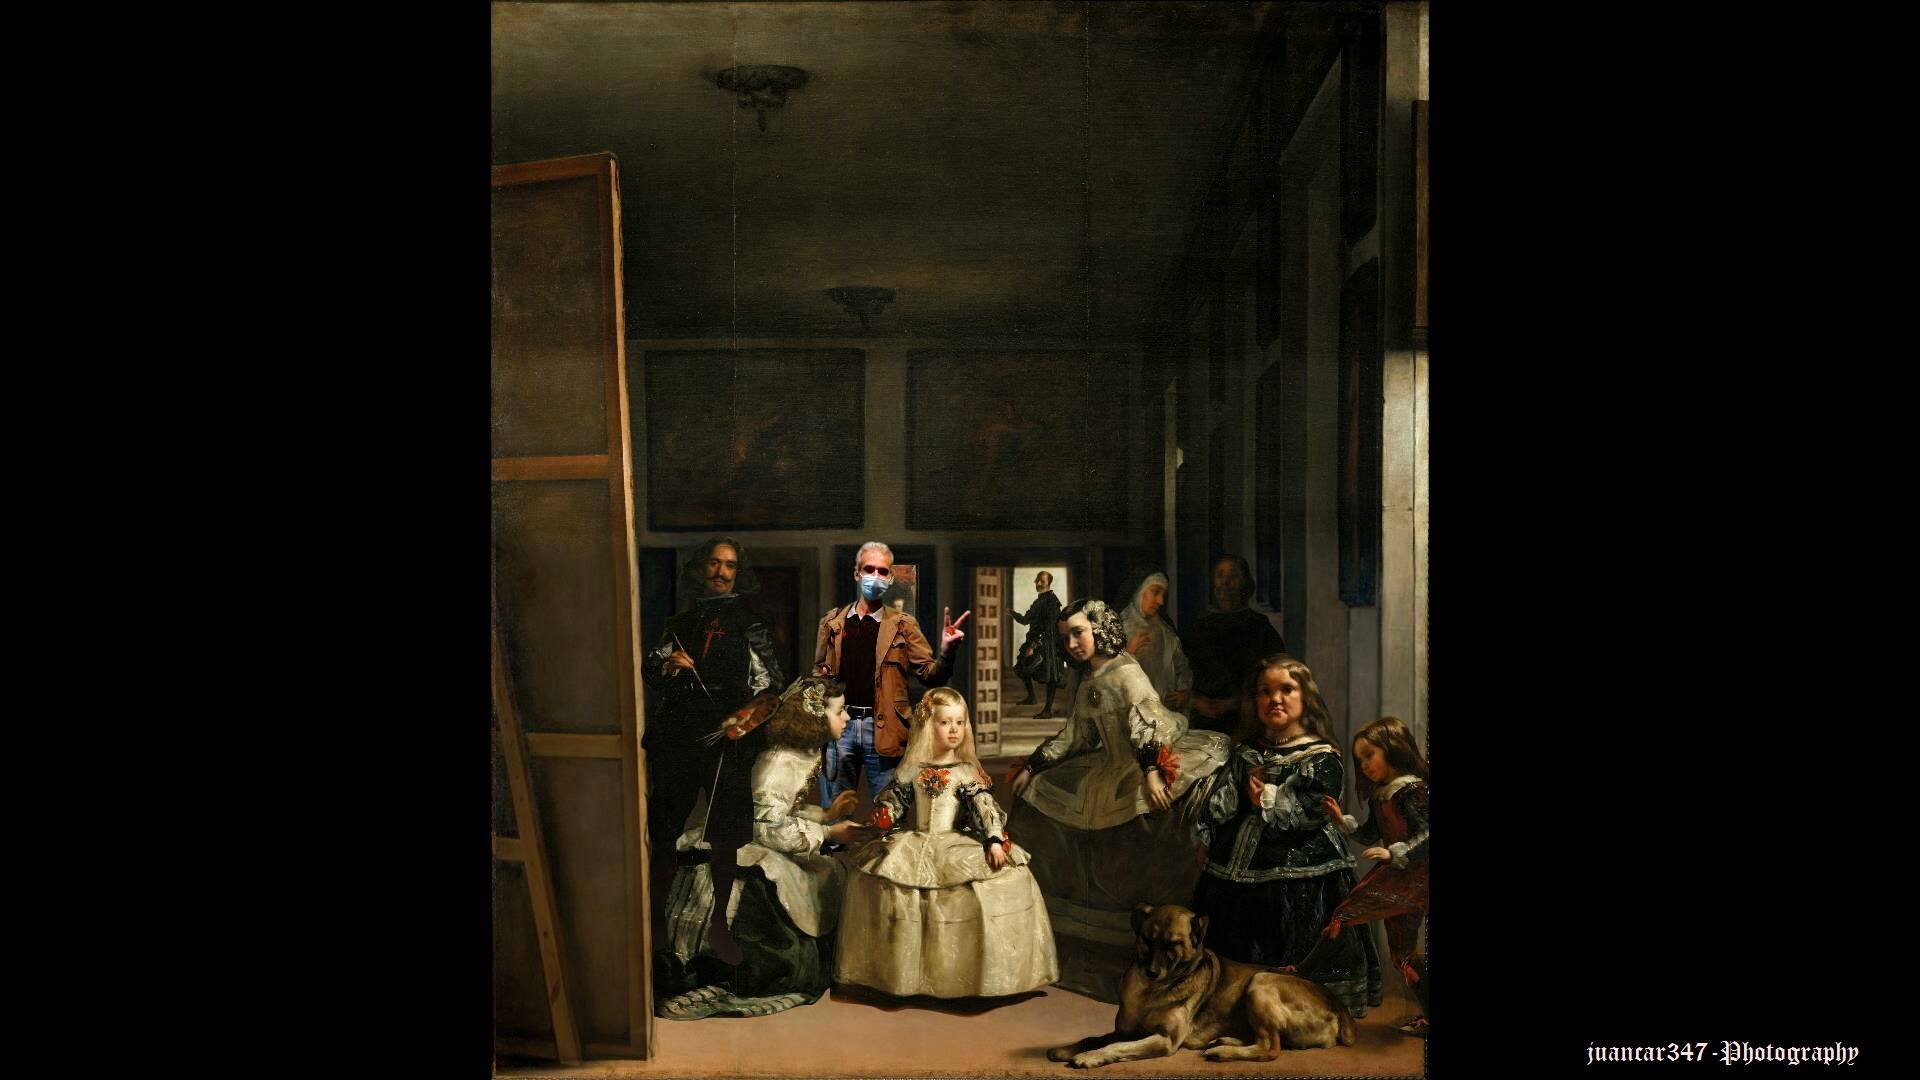 And the opportunity to enter the painting of Velázquez